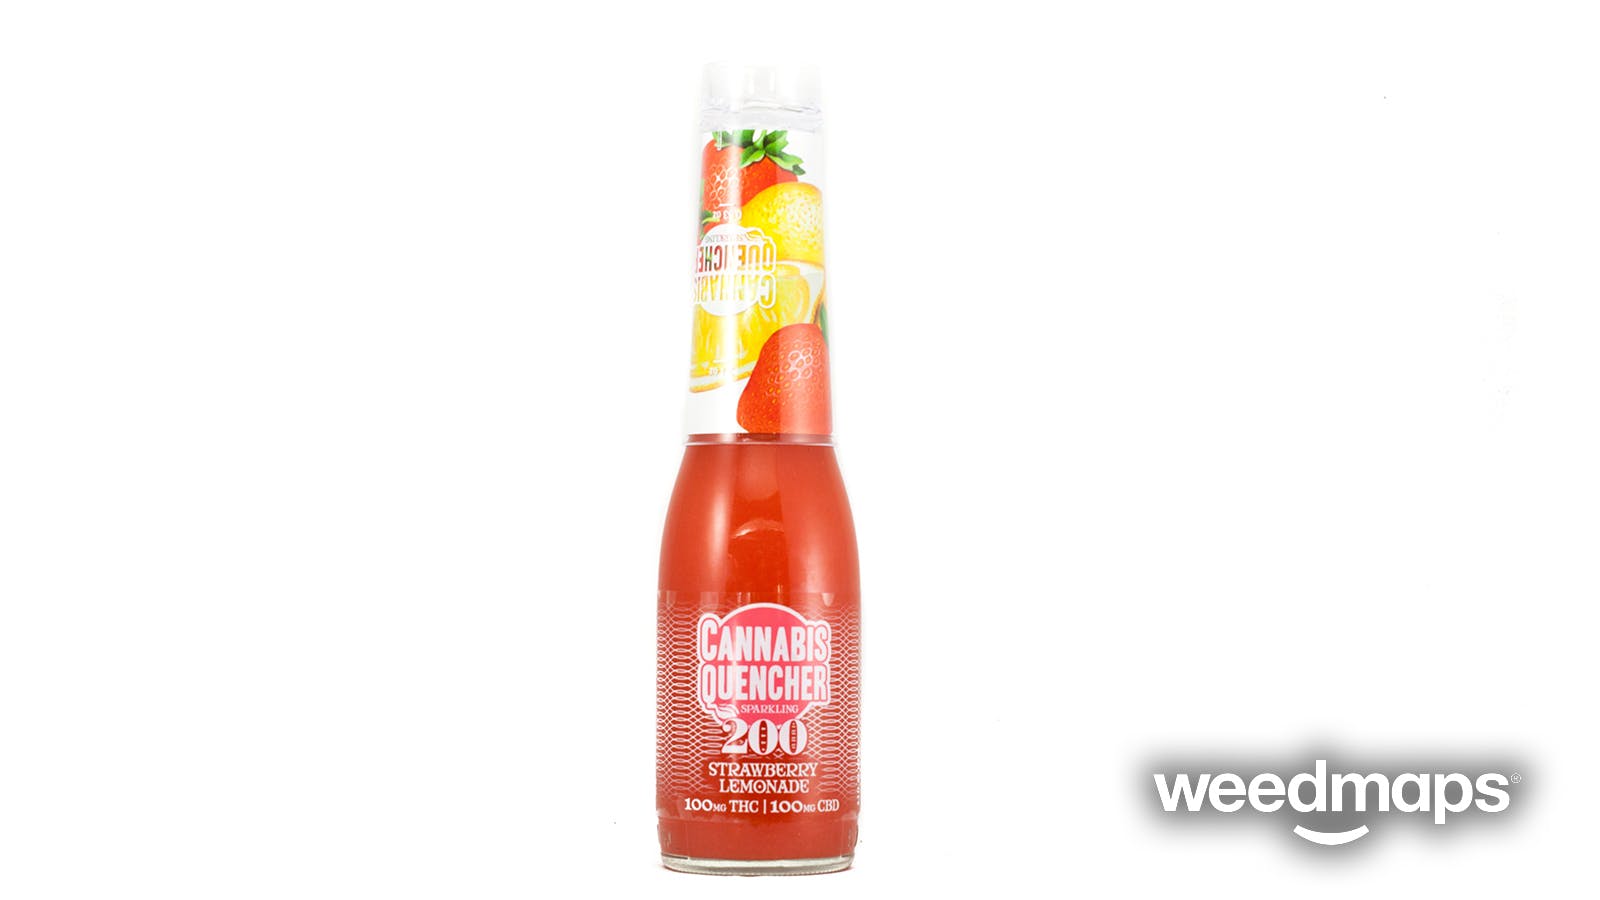 edible-11-quencher-candy-strawberry-2c-mango